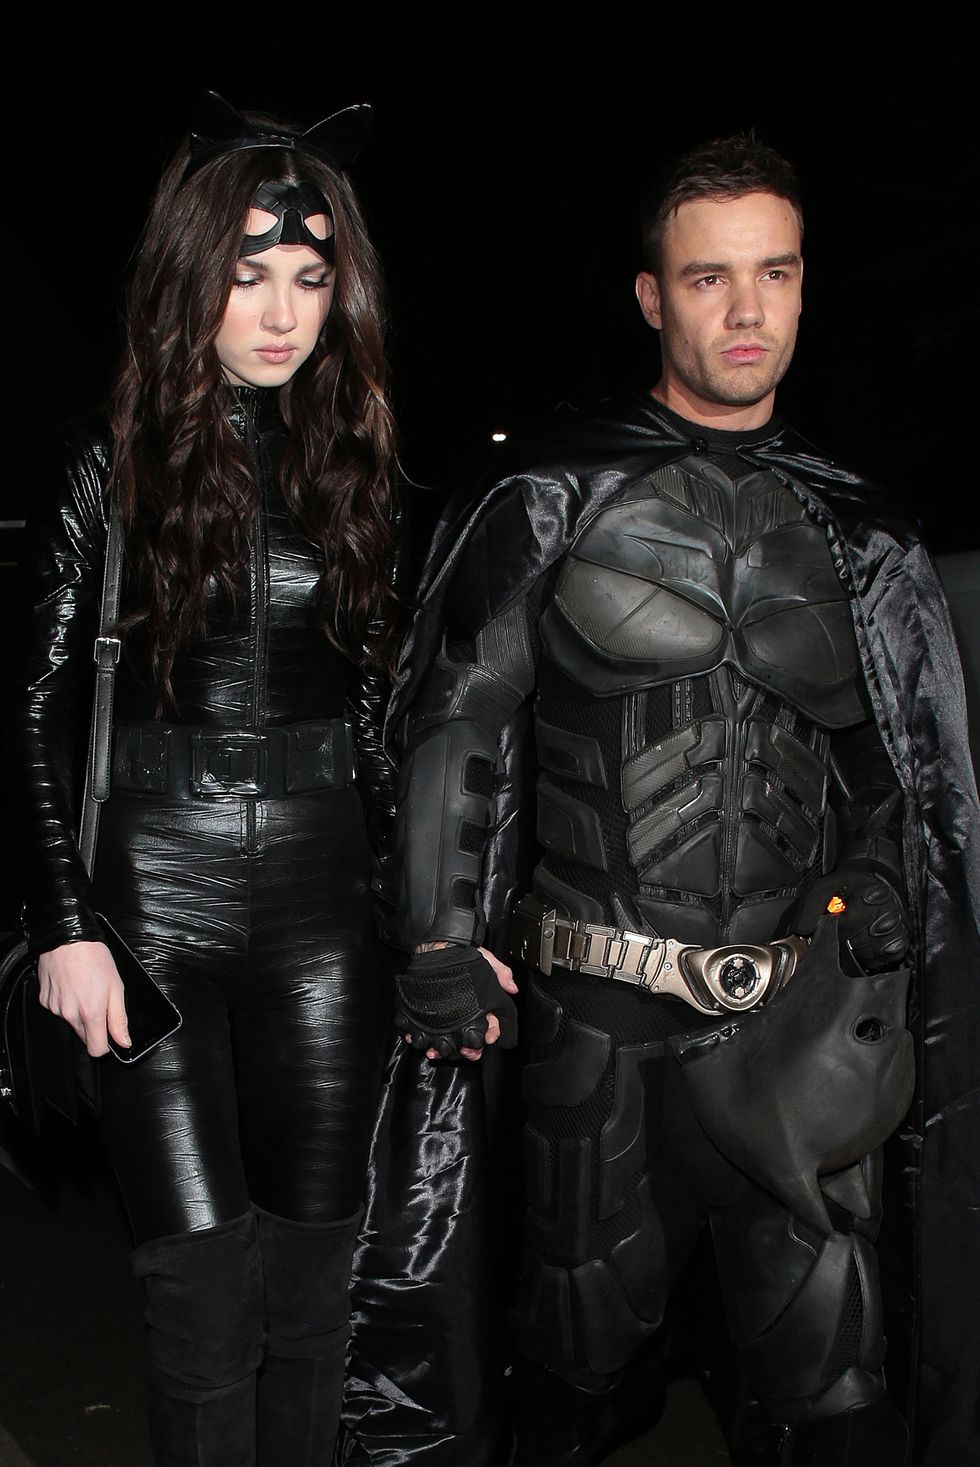 20 Legendary Celebrity Halloween Costumes from Our Favourite Couples 